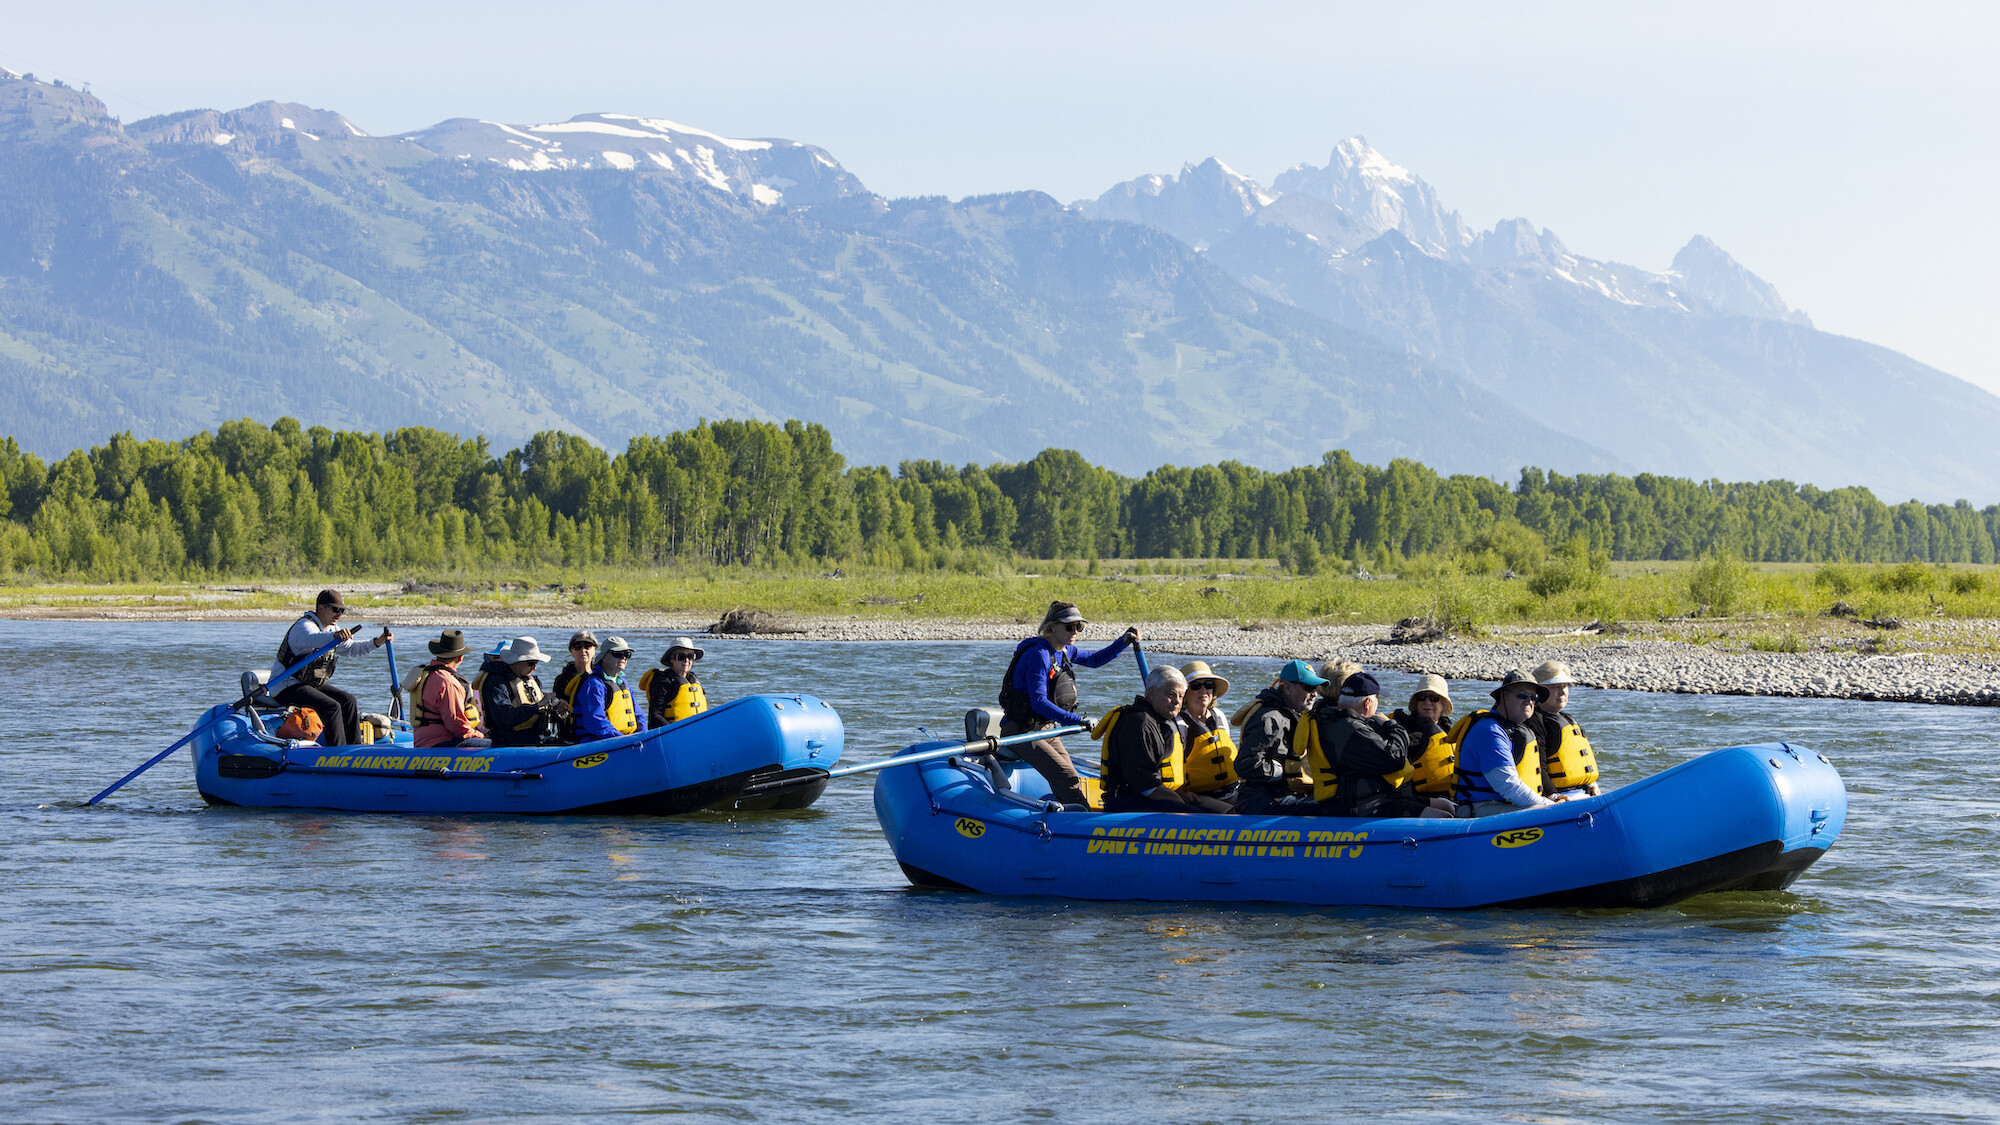 Rafts guides float down a scenic section of the Snake River with views of the Tetons mountains.